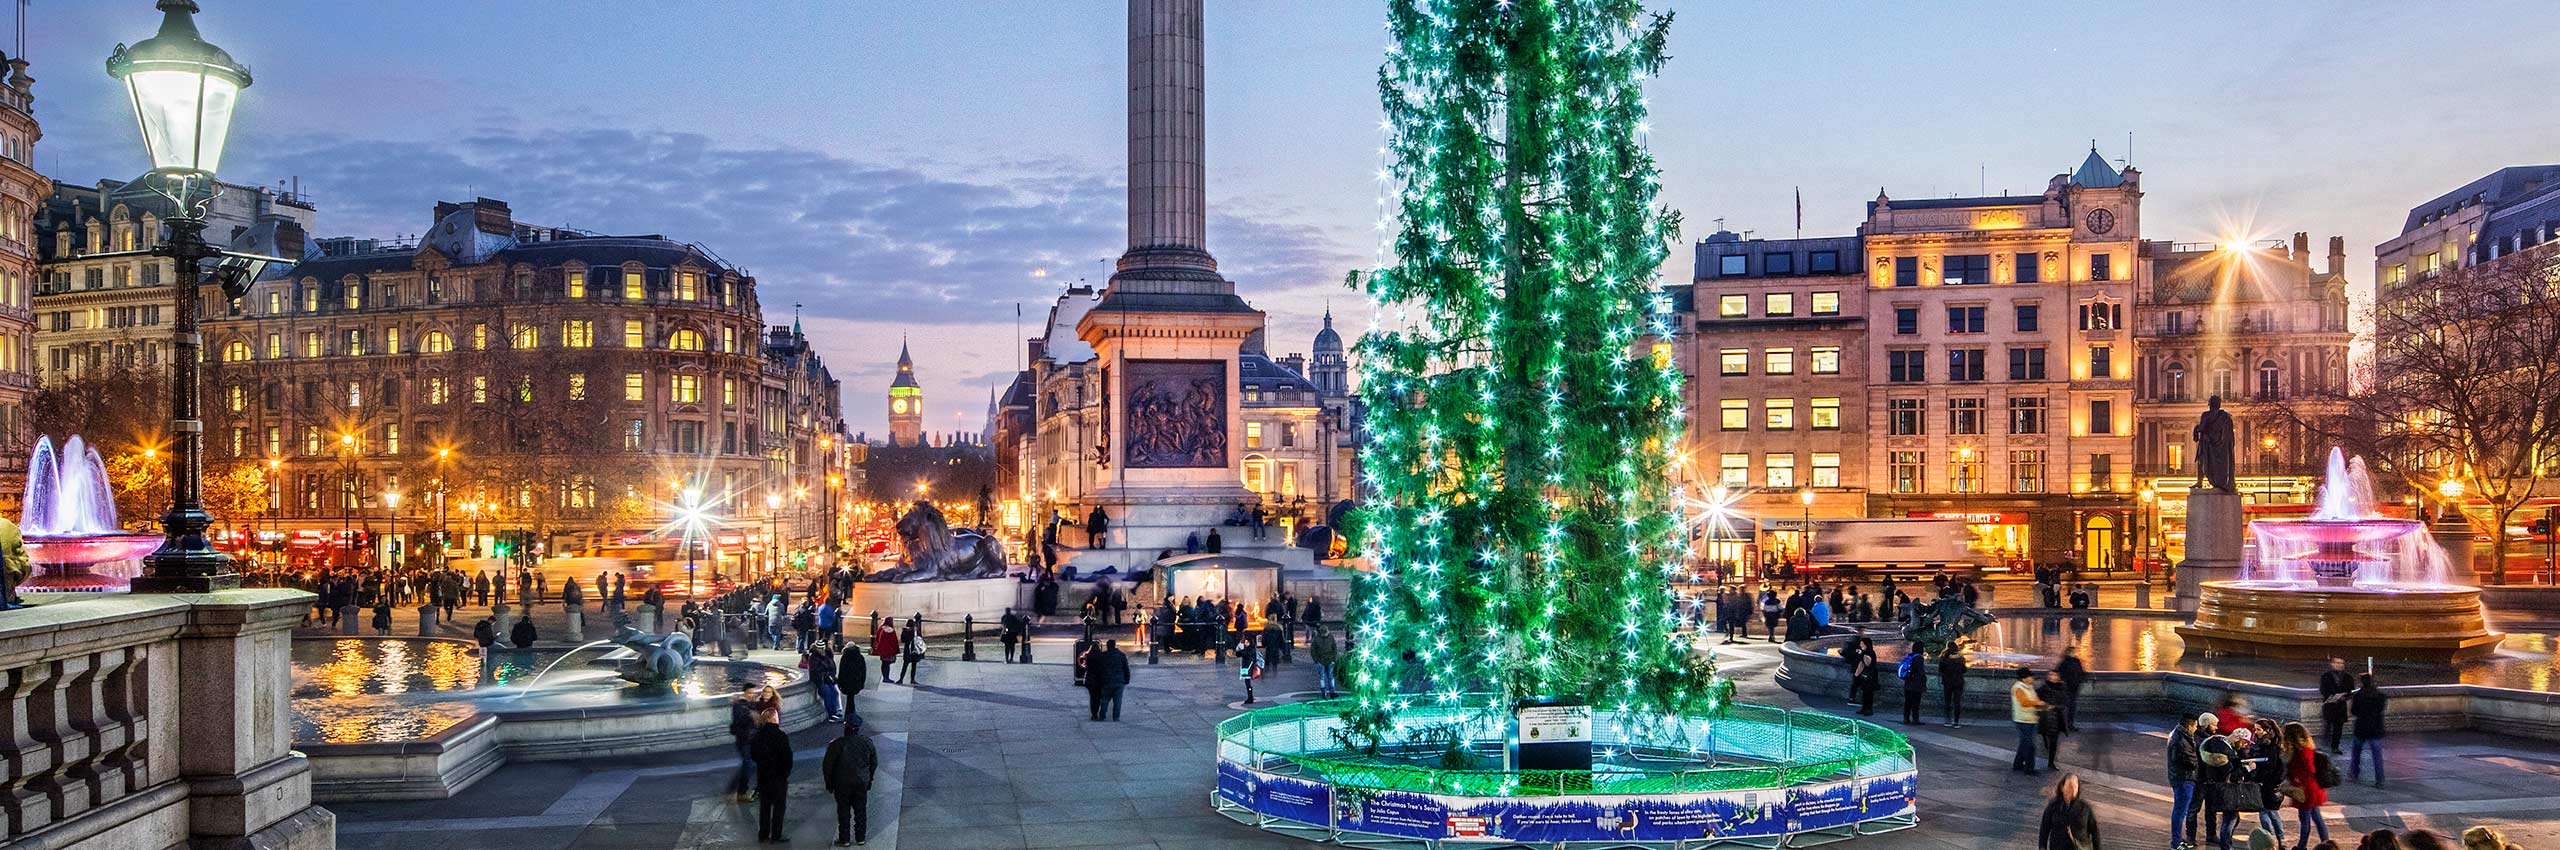 BVH-20643866 | UK/London, Christmas Tree on Trafalgar Square with Admiral Lord Nelson Column in December | © Reinhard Schmid/4Corners